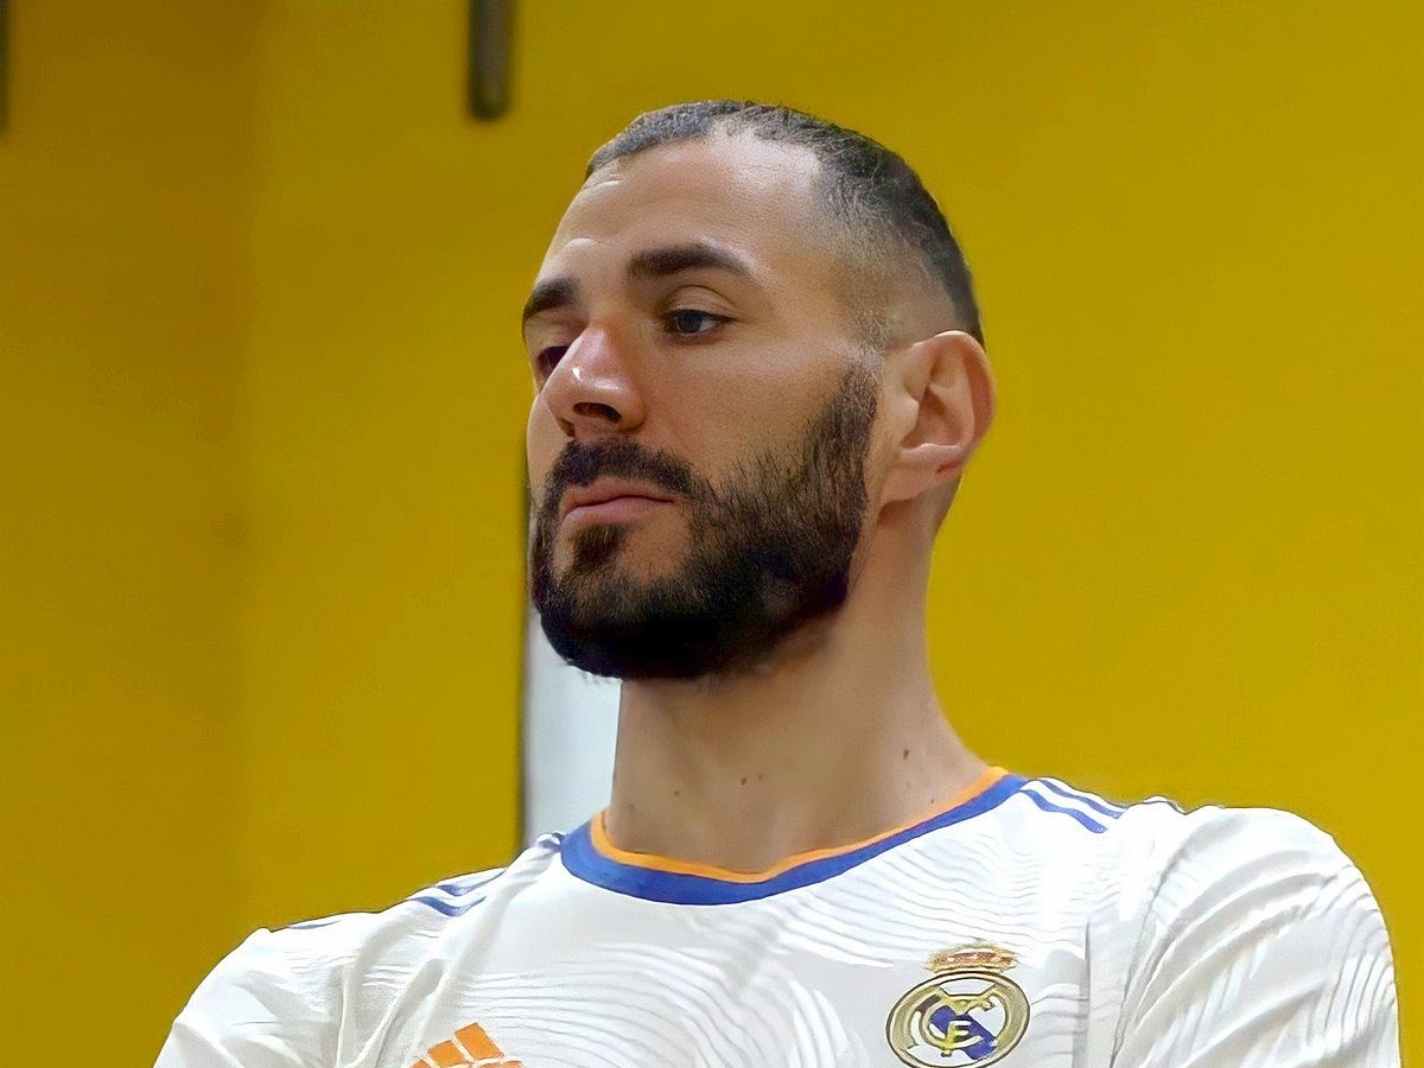 Real Sociedad vs Real Madrid Predictions: Can Benzema Carry the Team?